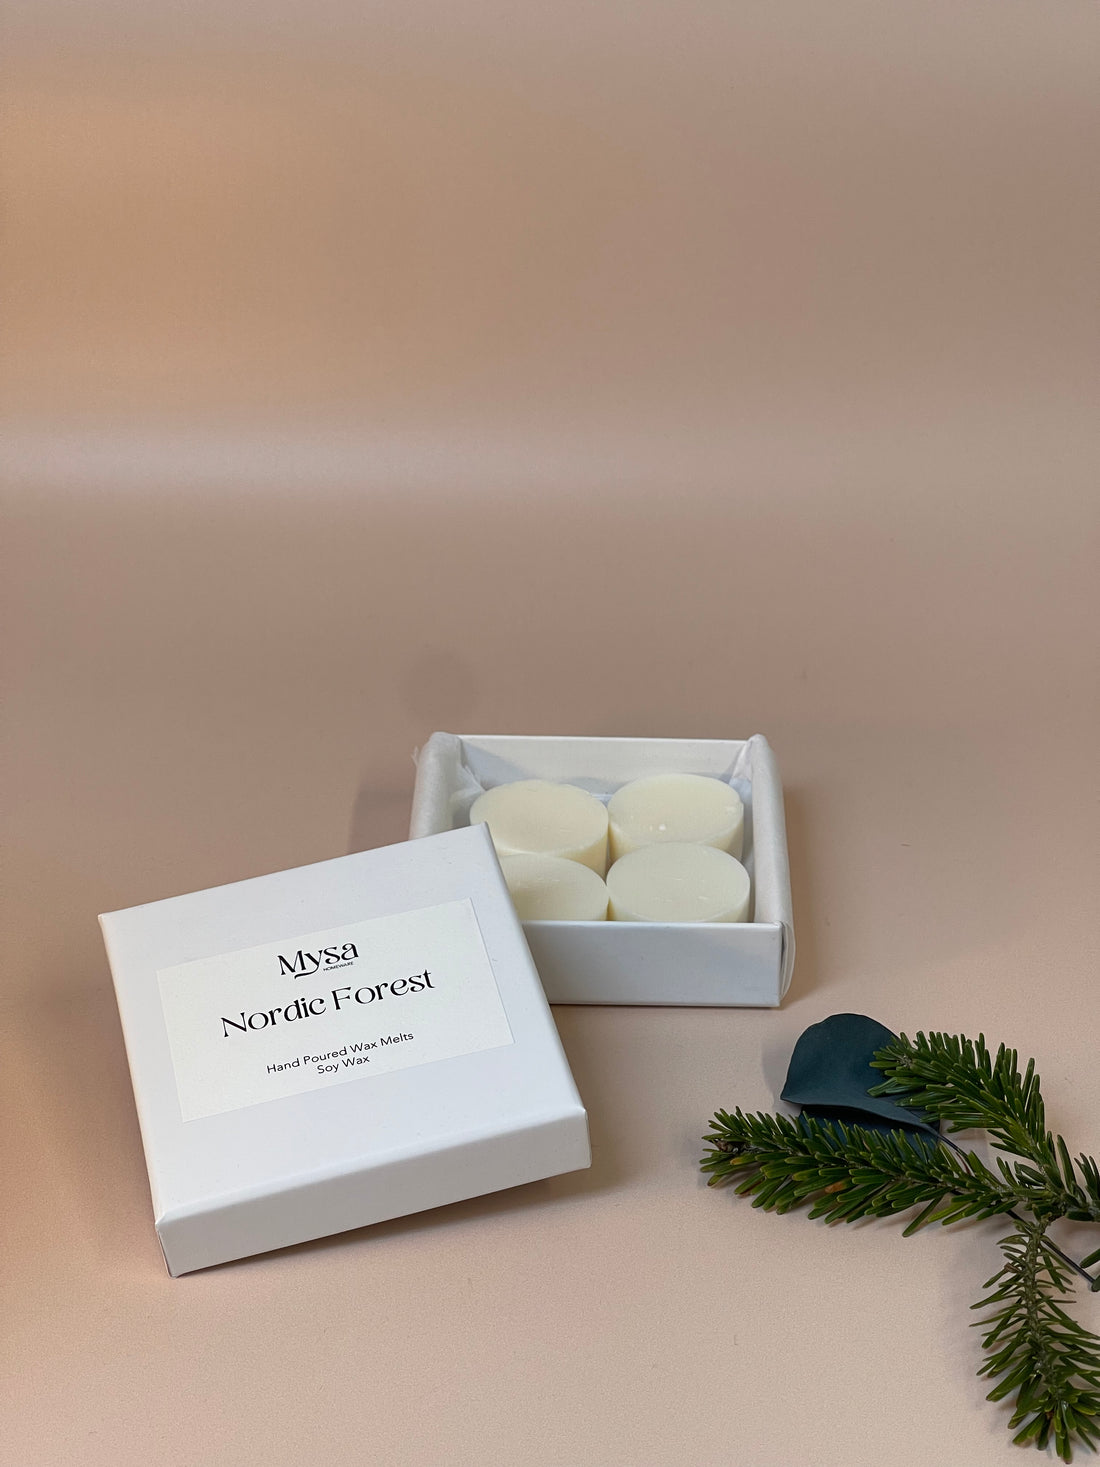 Nordic Forest luxury scented wax melts in gift box, with soy wax and pine and eucalyptus fragrance.